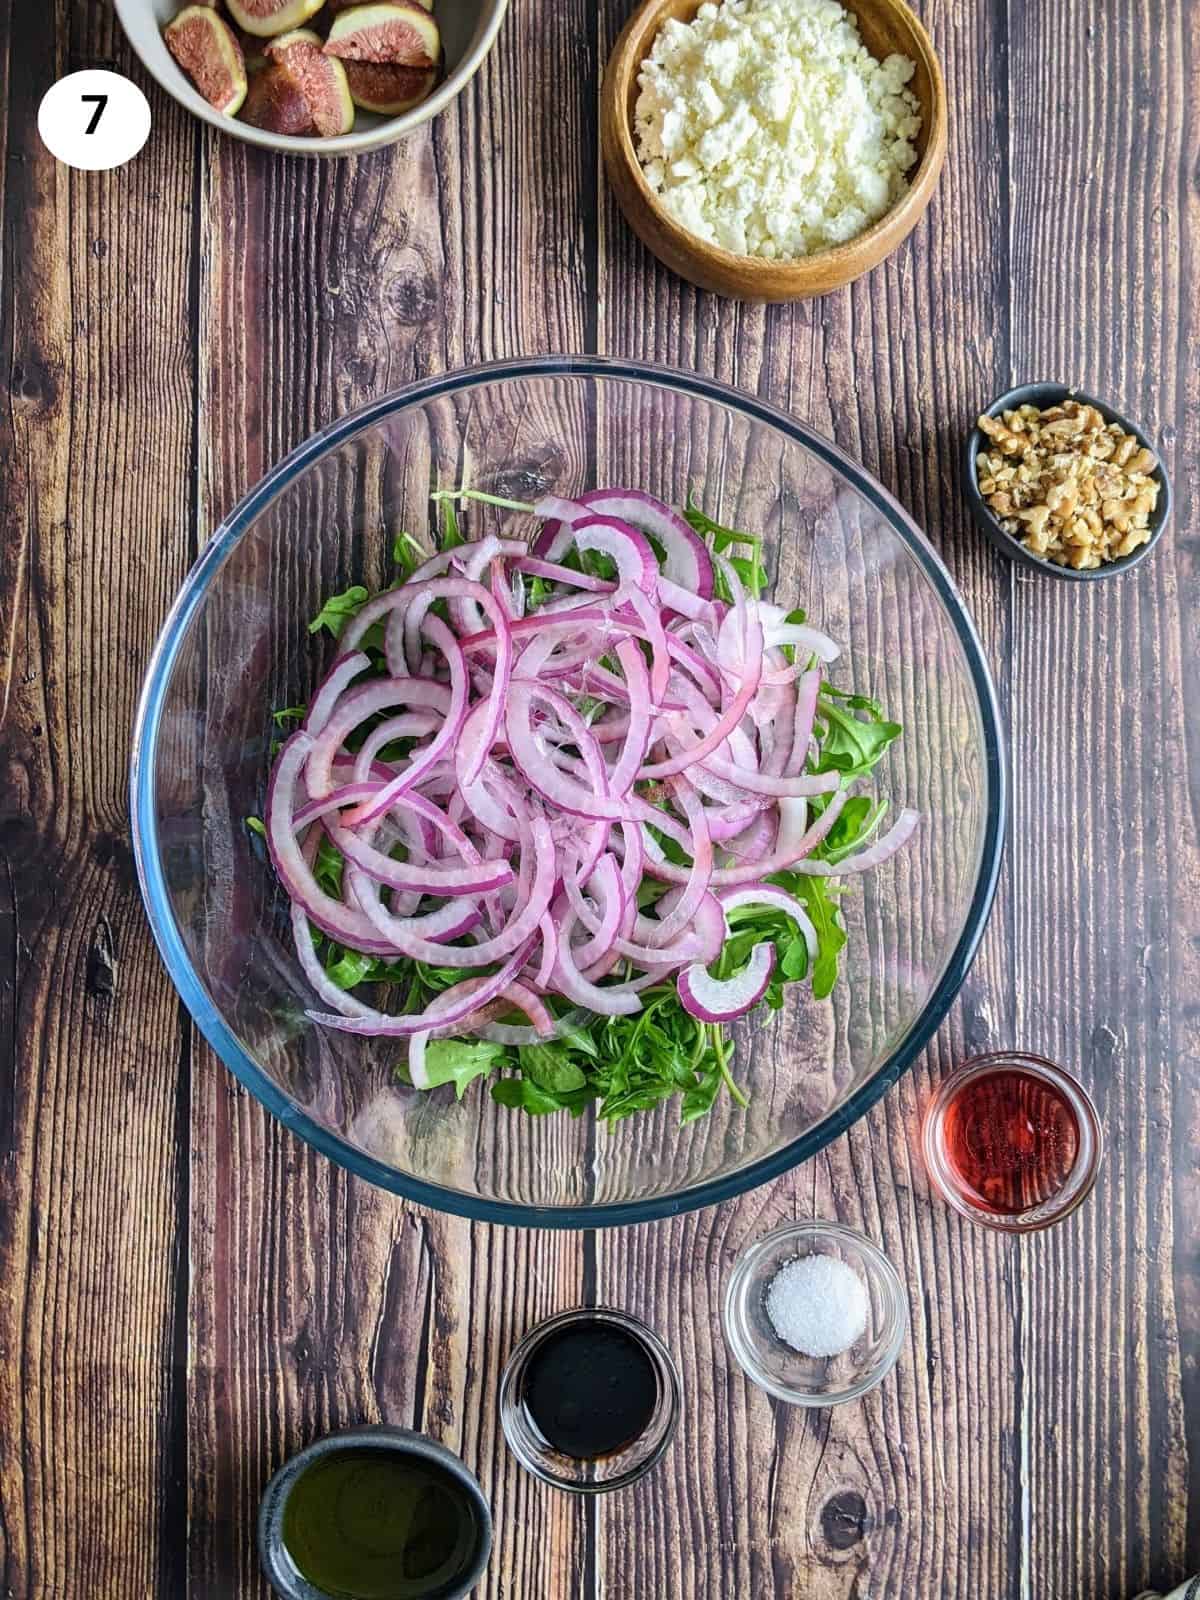 Adding the arugula and onions to a serving bowl.